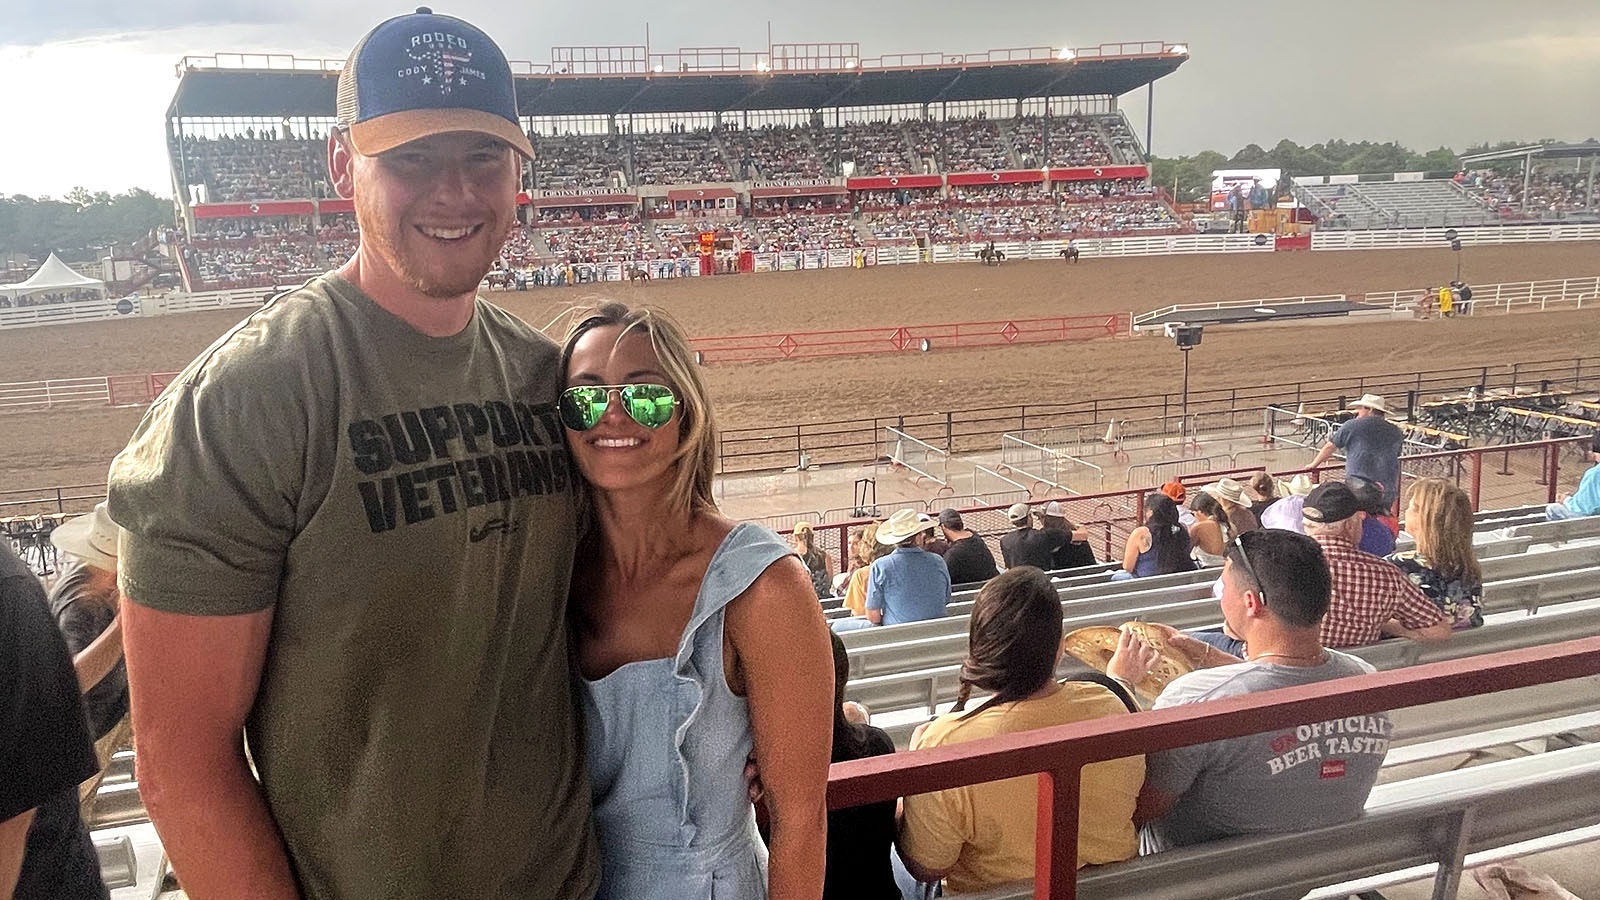 Newlyweds Trey and Sheena Kothe at this year's Cheyenne Frontier Days rodeo. The couple met at CFD and the event holds a special place in their relationship.